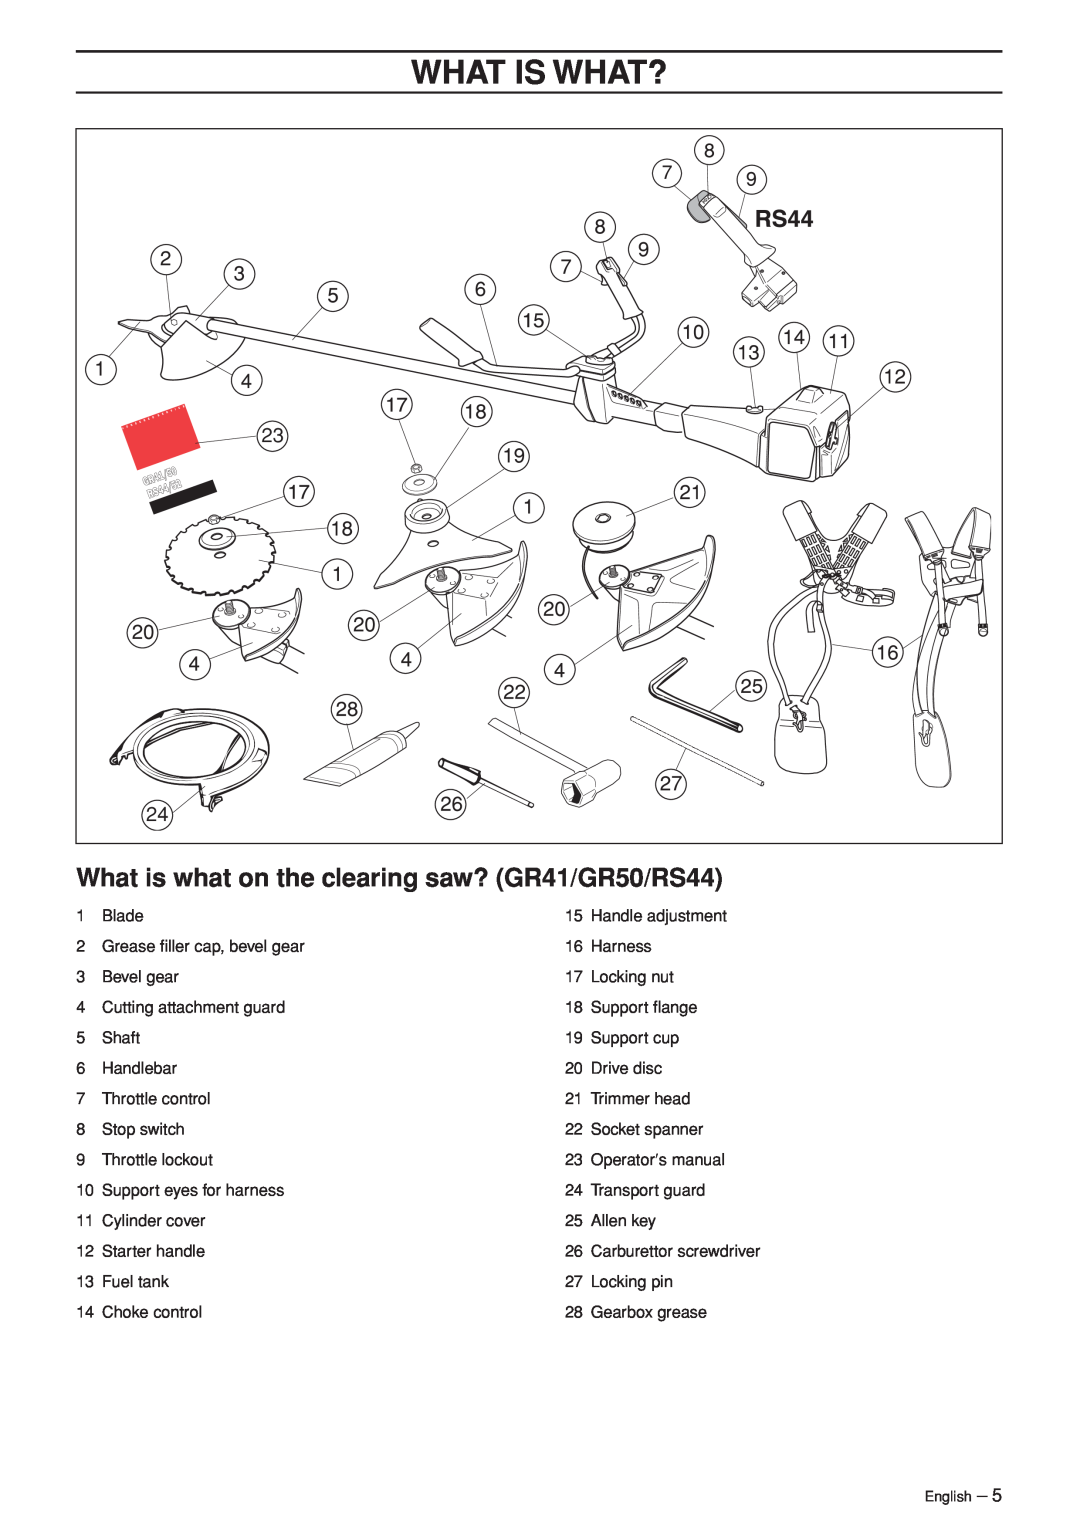 Husqvarna RS52 manual What Is What?, What is what on the clearing saw? GR41/GR50/RS44 